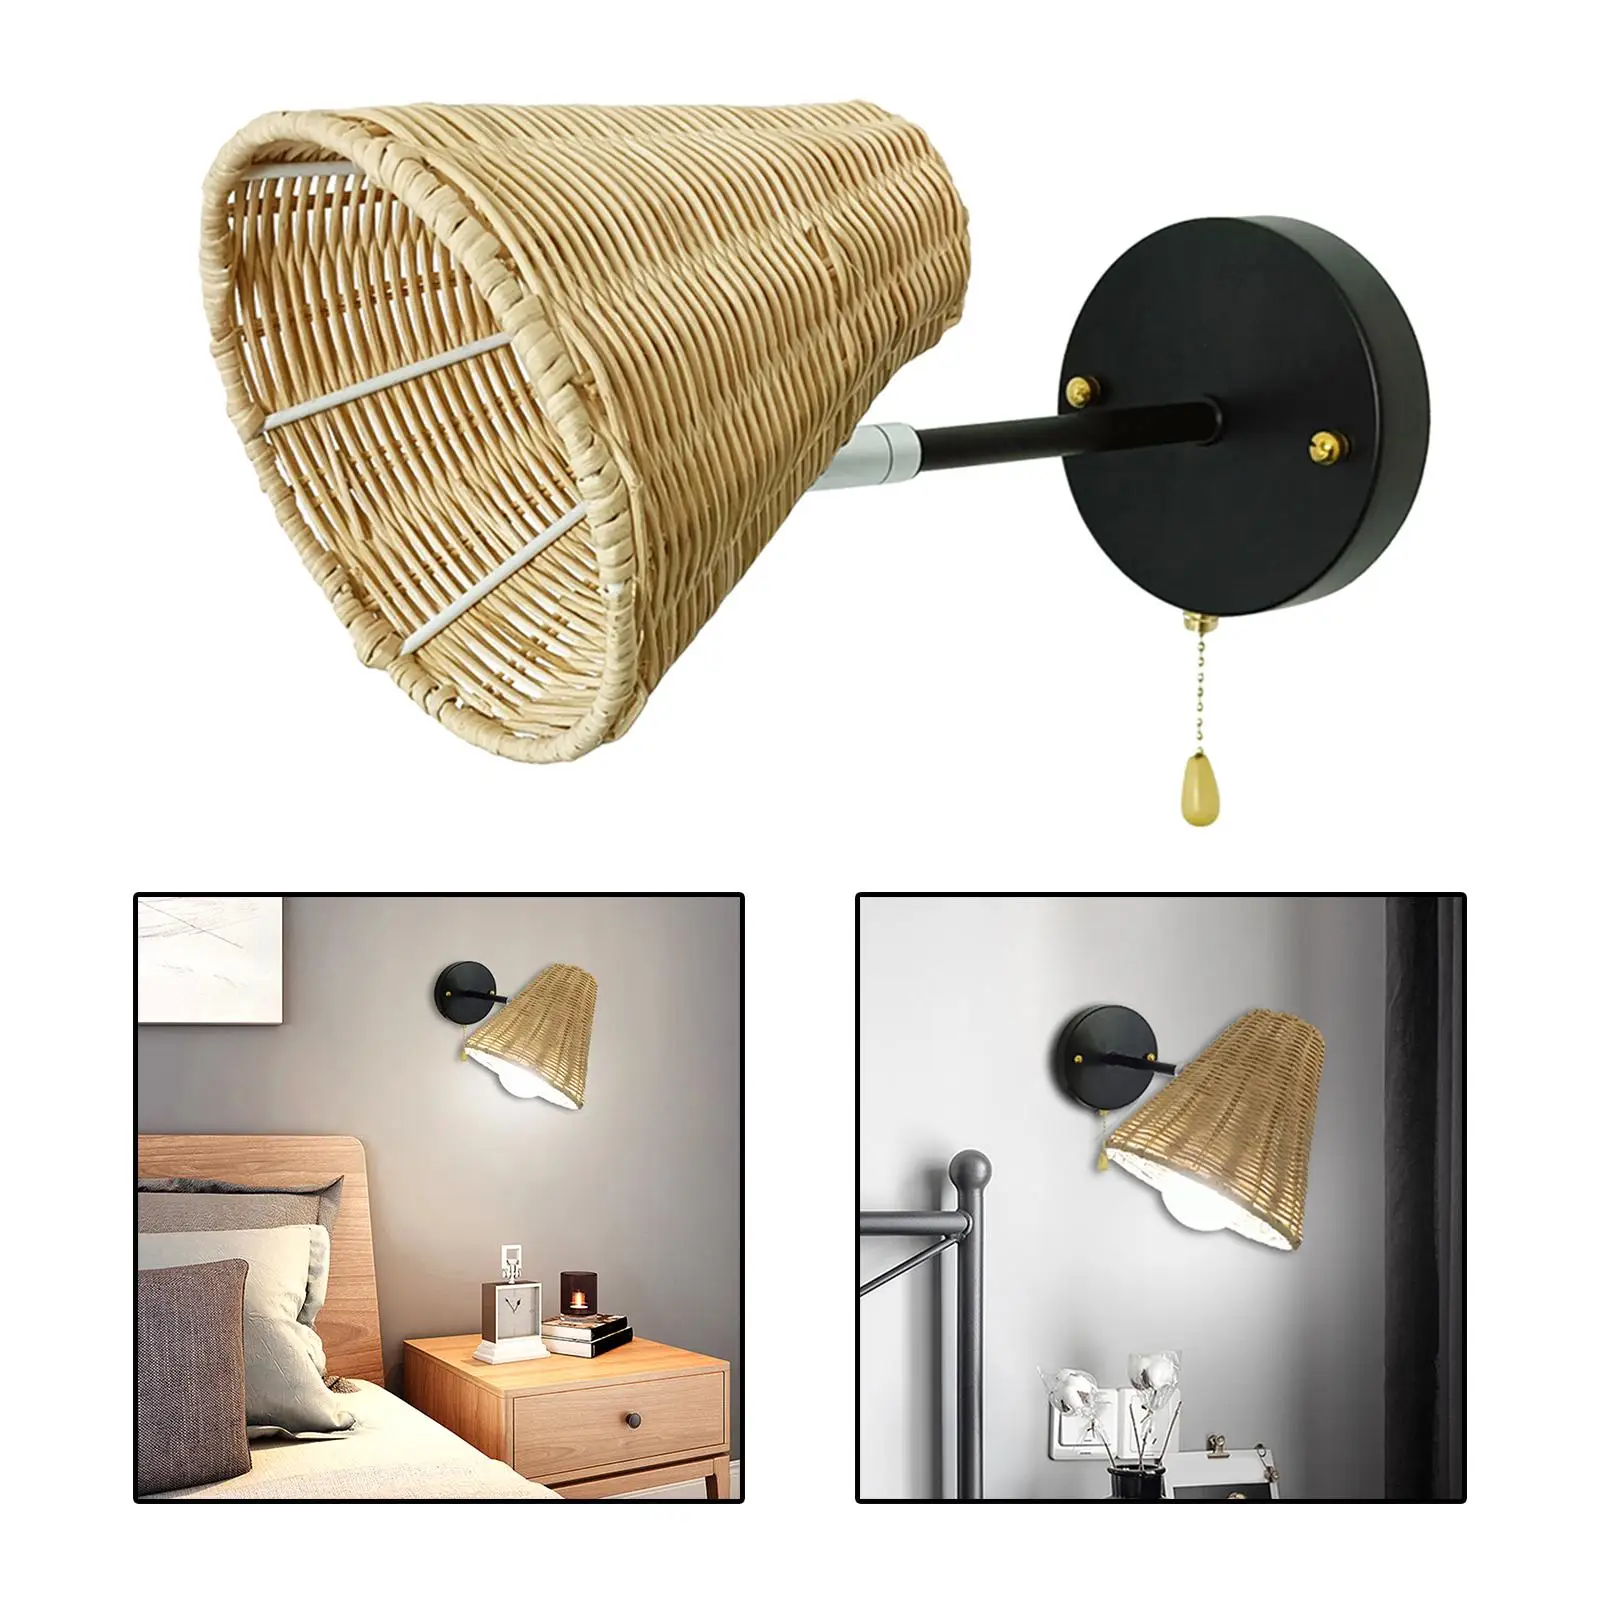 Retro Rattan Wall Lamp Light Sconce Adjustable with Pull Cord Switch E27 Lighting Fixture for Hallway Bedside Bathroom Bedroom